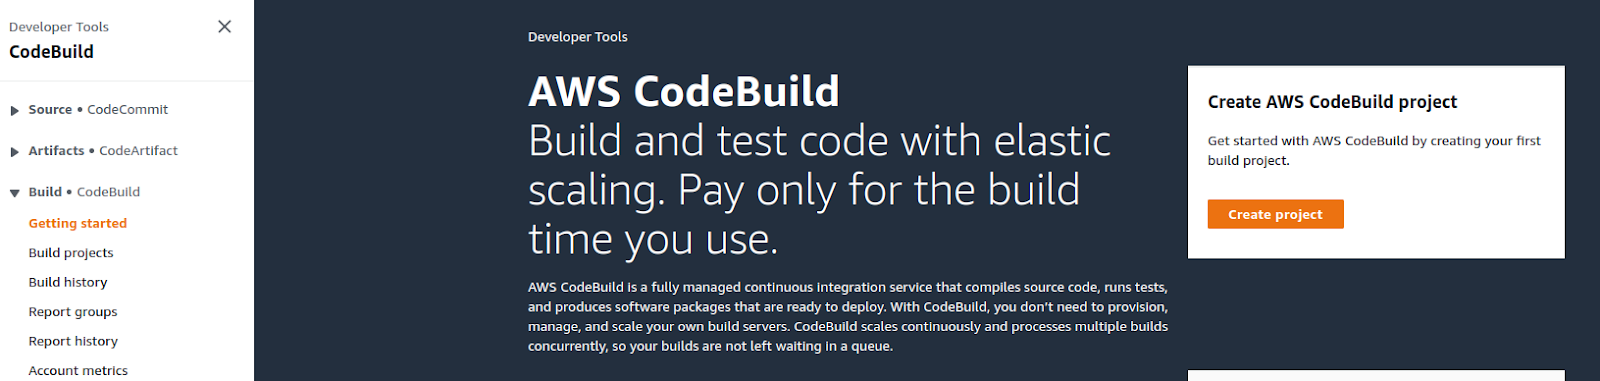 Create a CodeBuild project